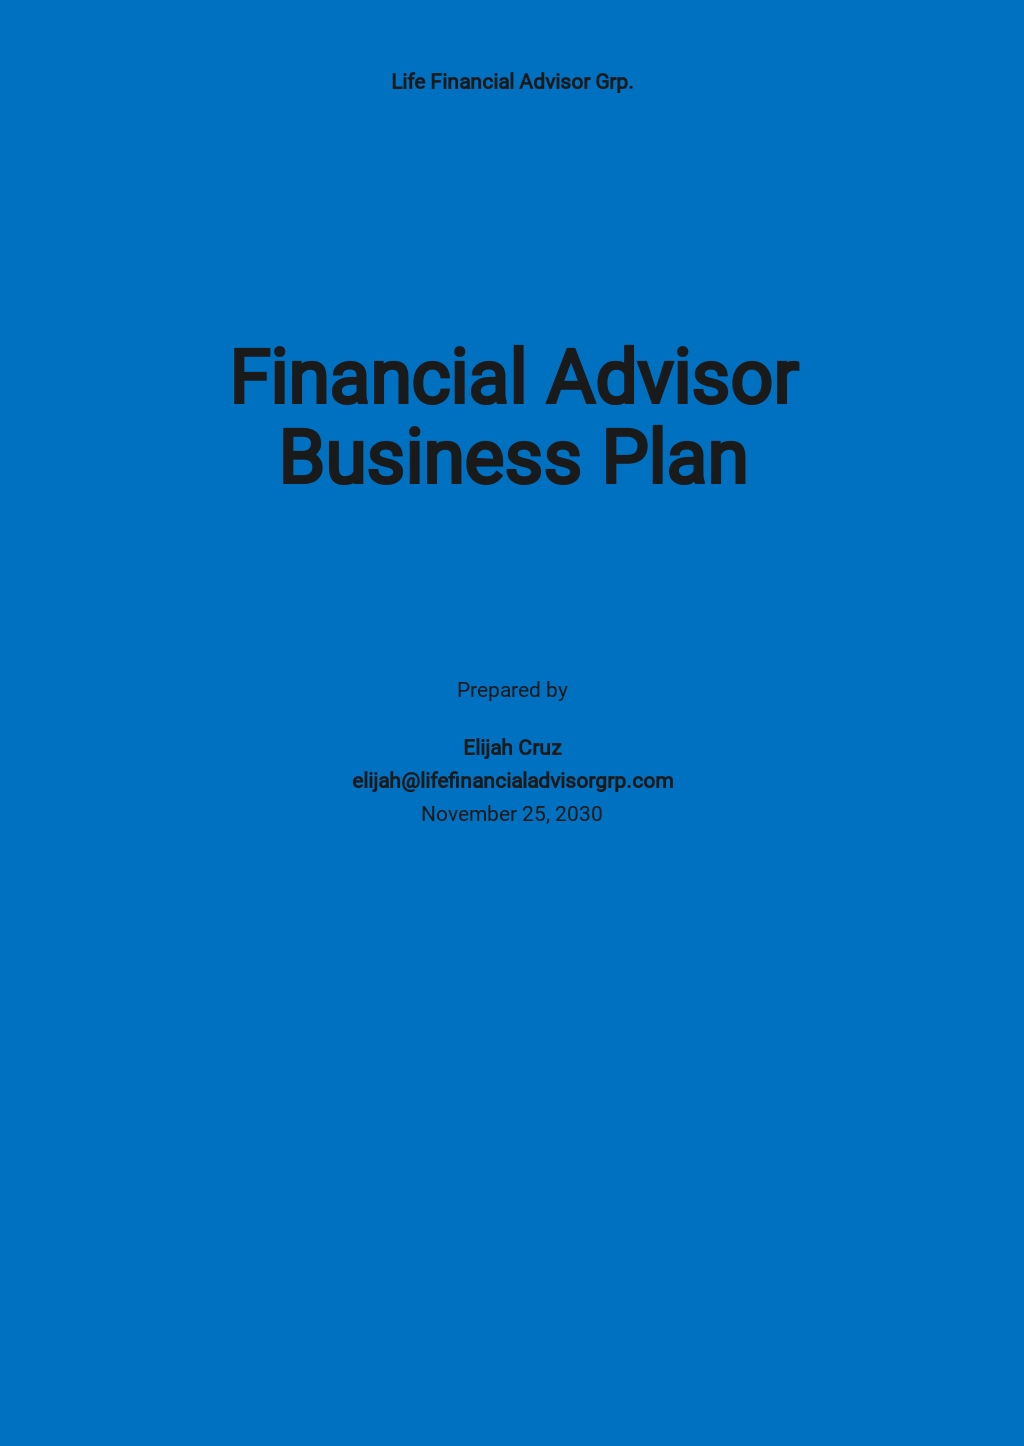 download financial planning